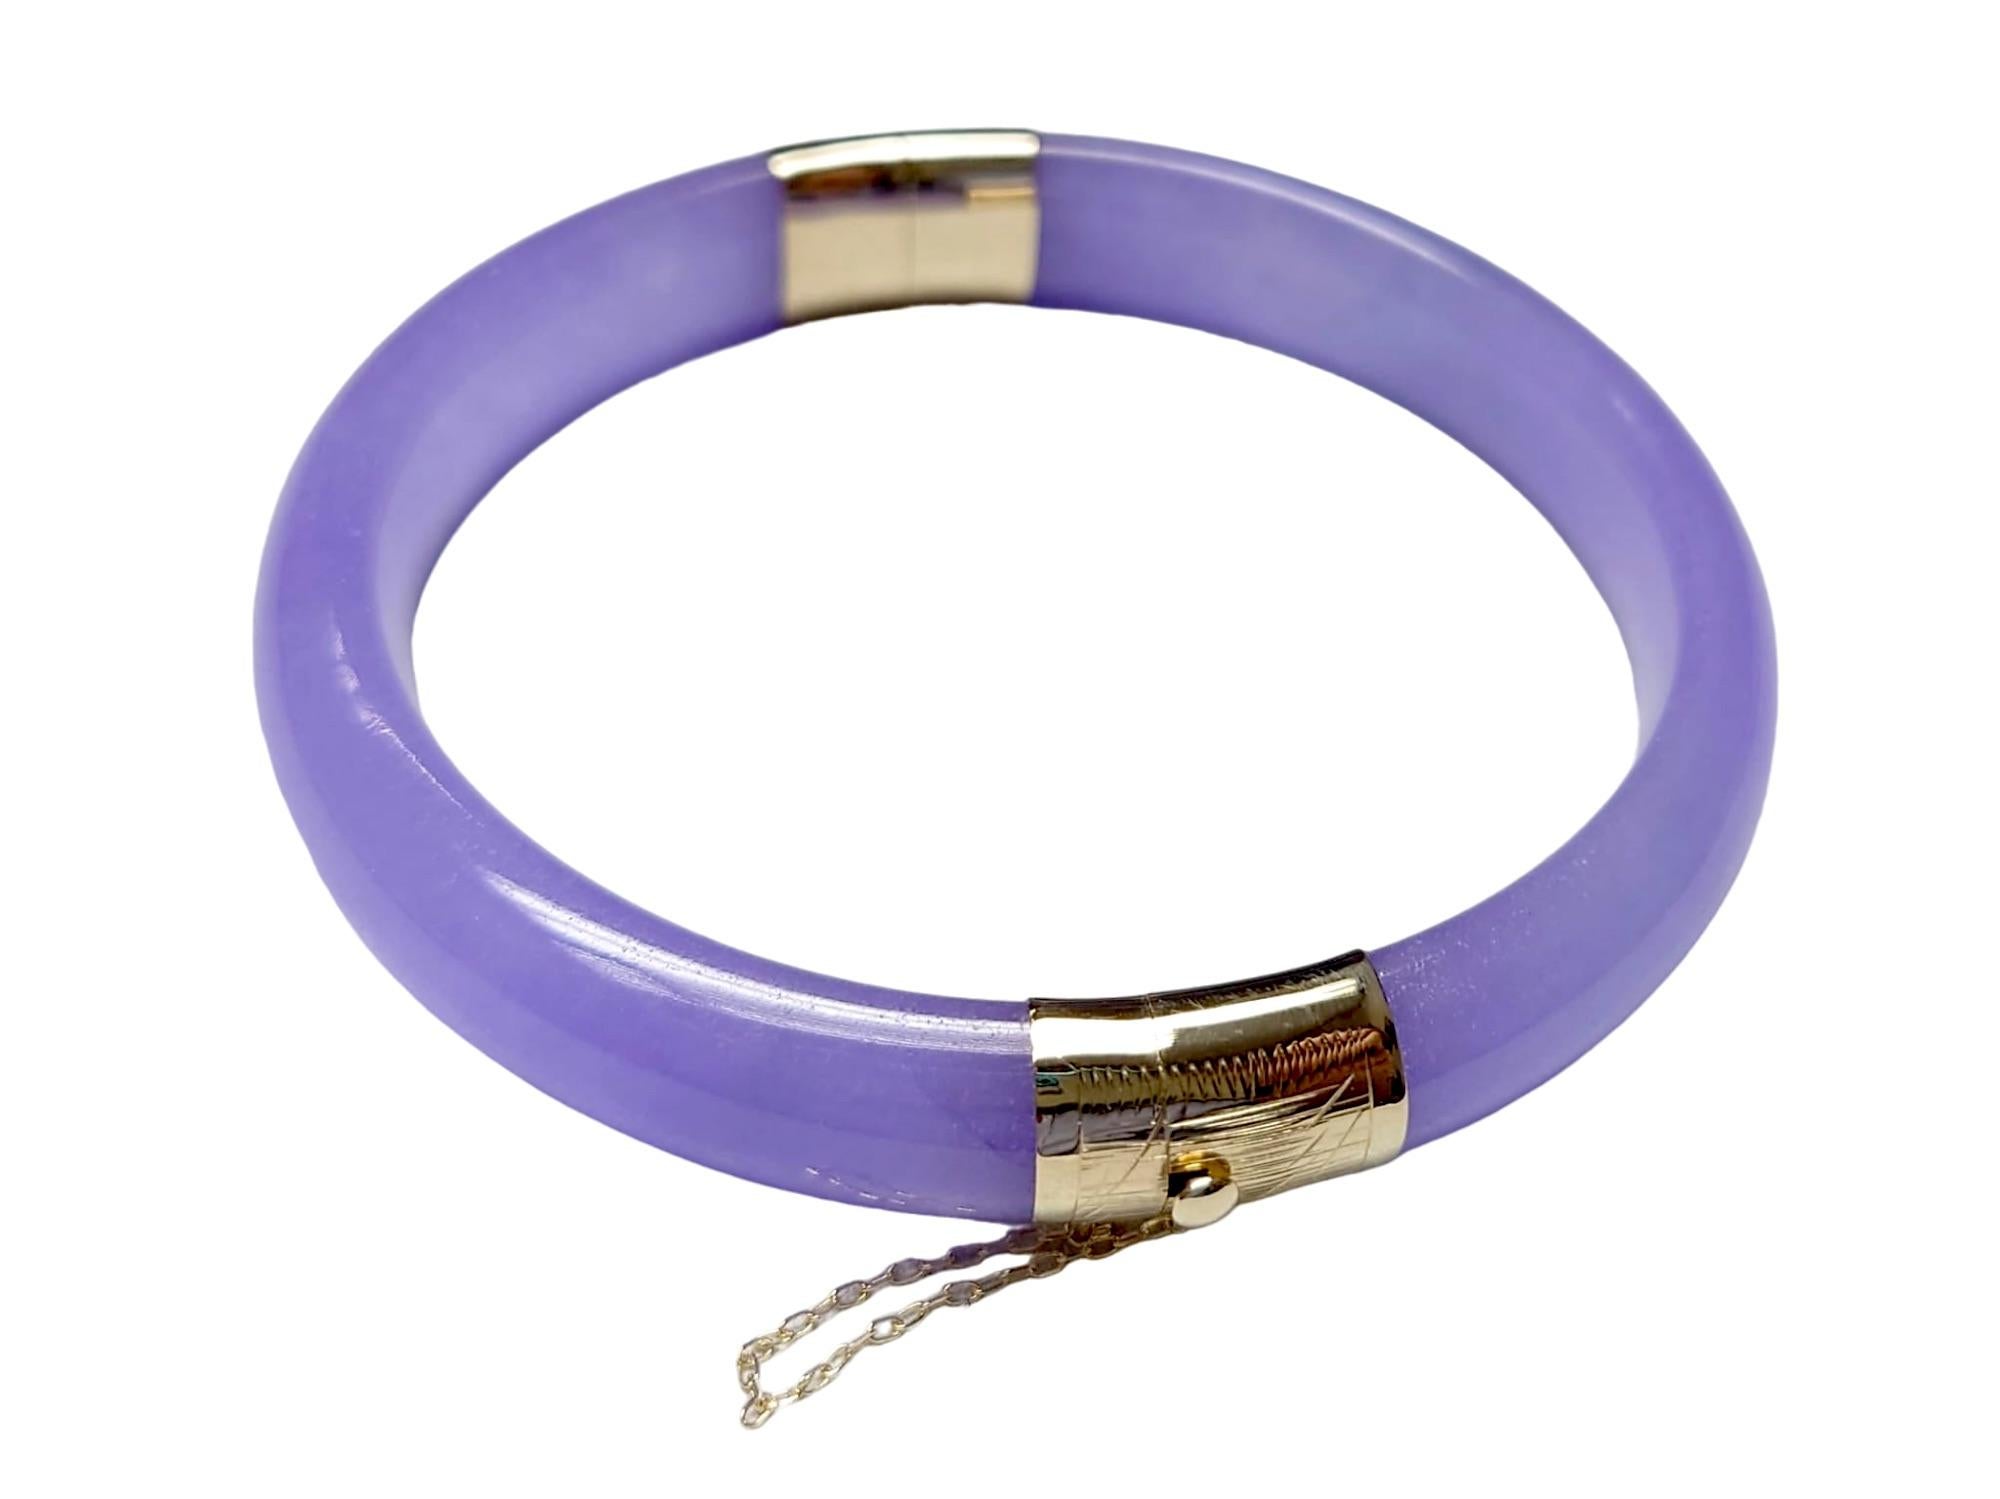 Viceroy's Circular Lavender Jade Bangle Bracelet (with 14K Yellow Gold) For Sale 5